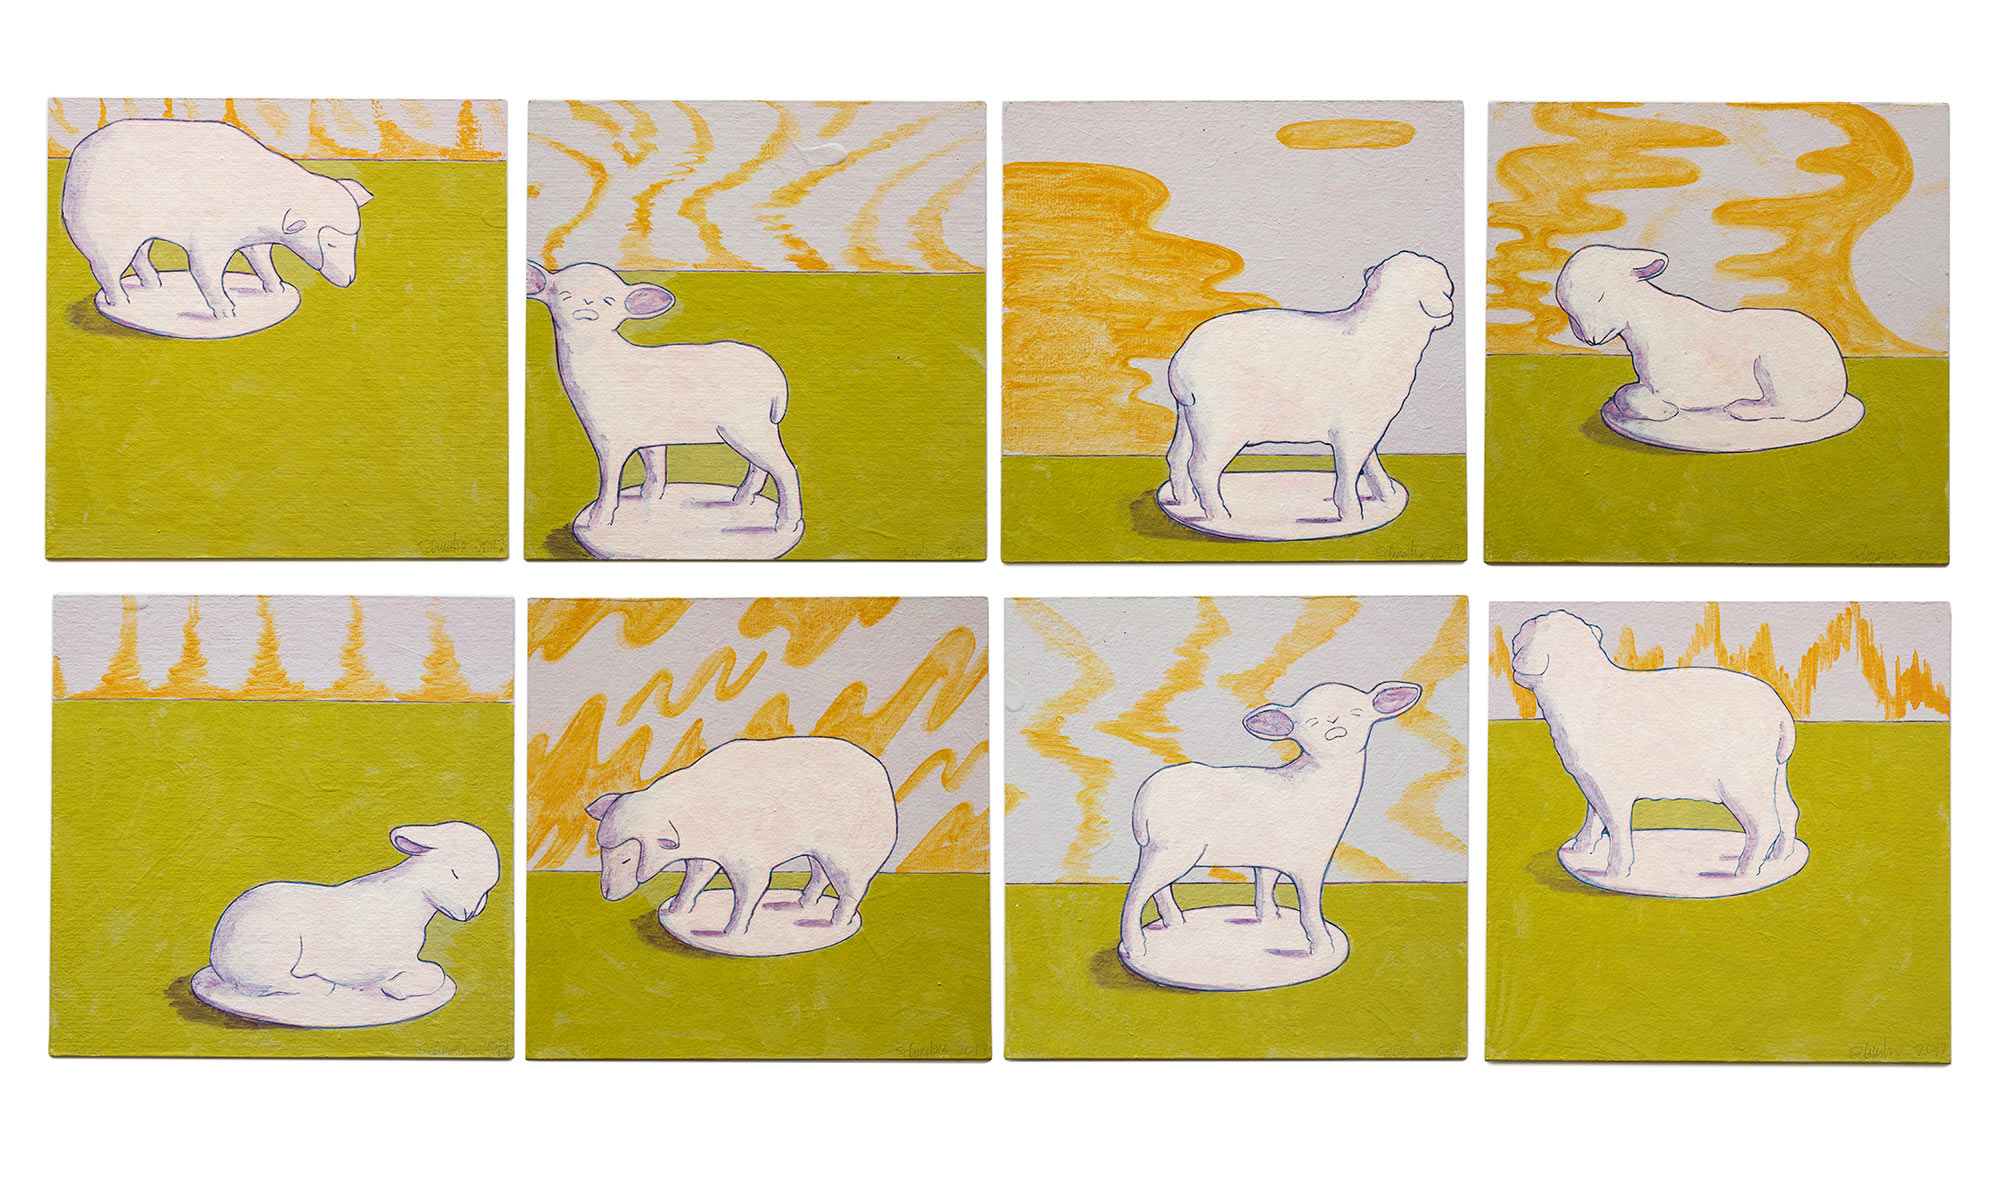   Lost Lambs,  2017 Acrylic on paper, 4” x 4” each 